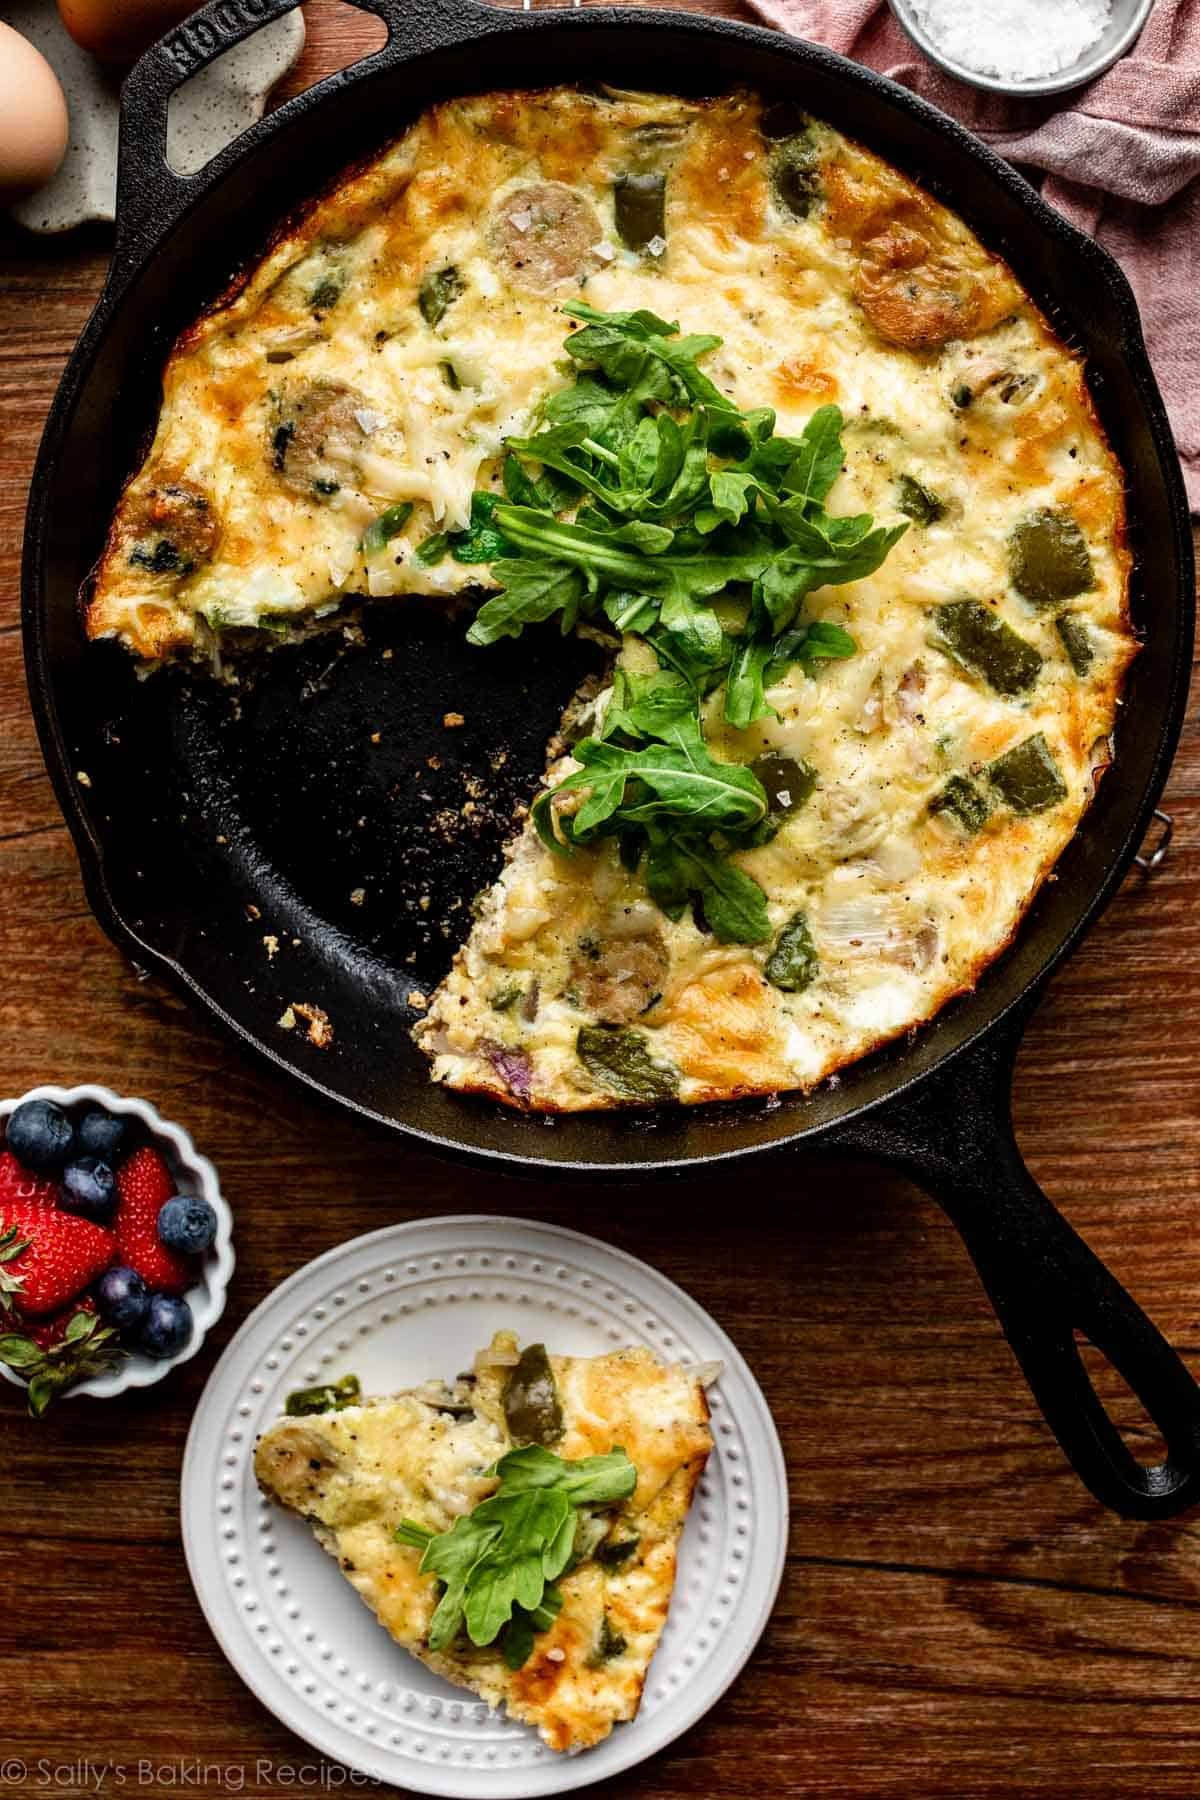 healthy breakfast idea photo shows chicken sausage and green pepper frittata with fresh arugula on top in cast iron skillet.